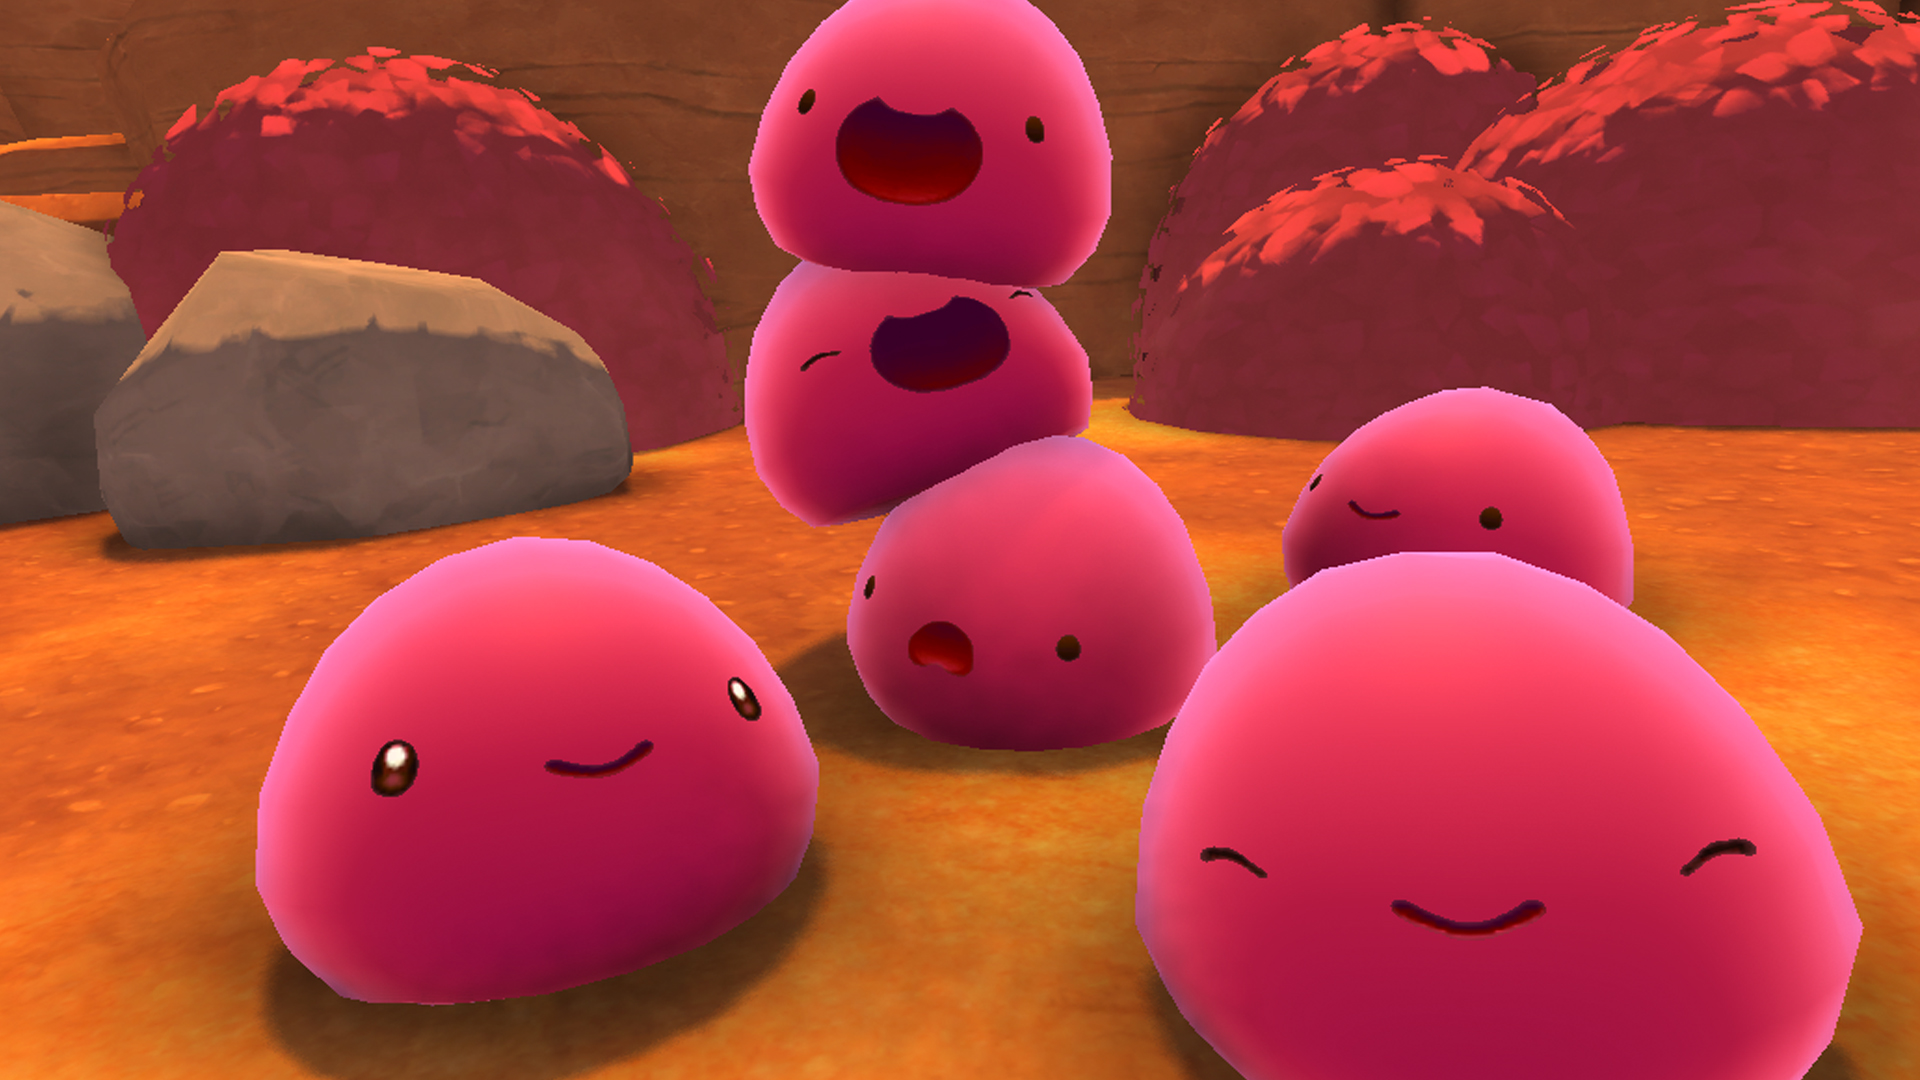 slime rancher 2 game download free